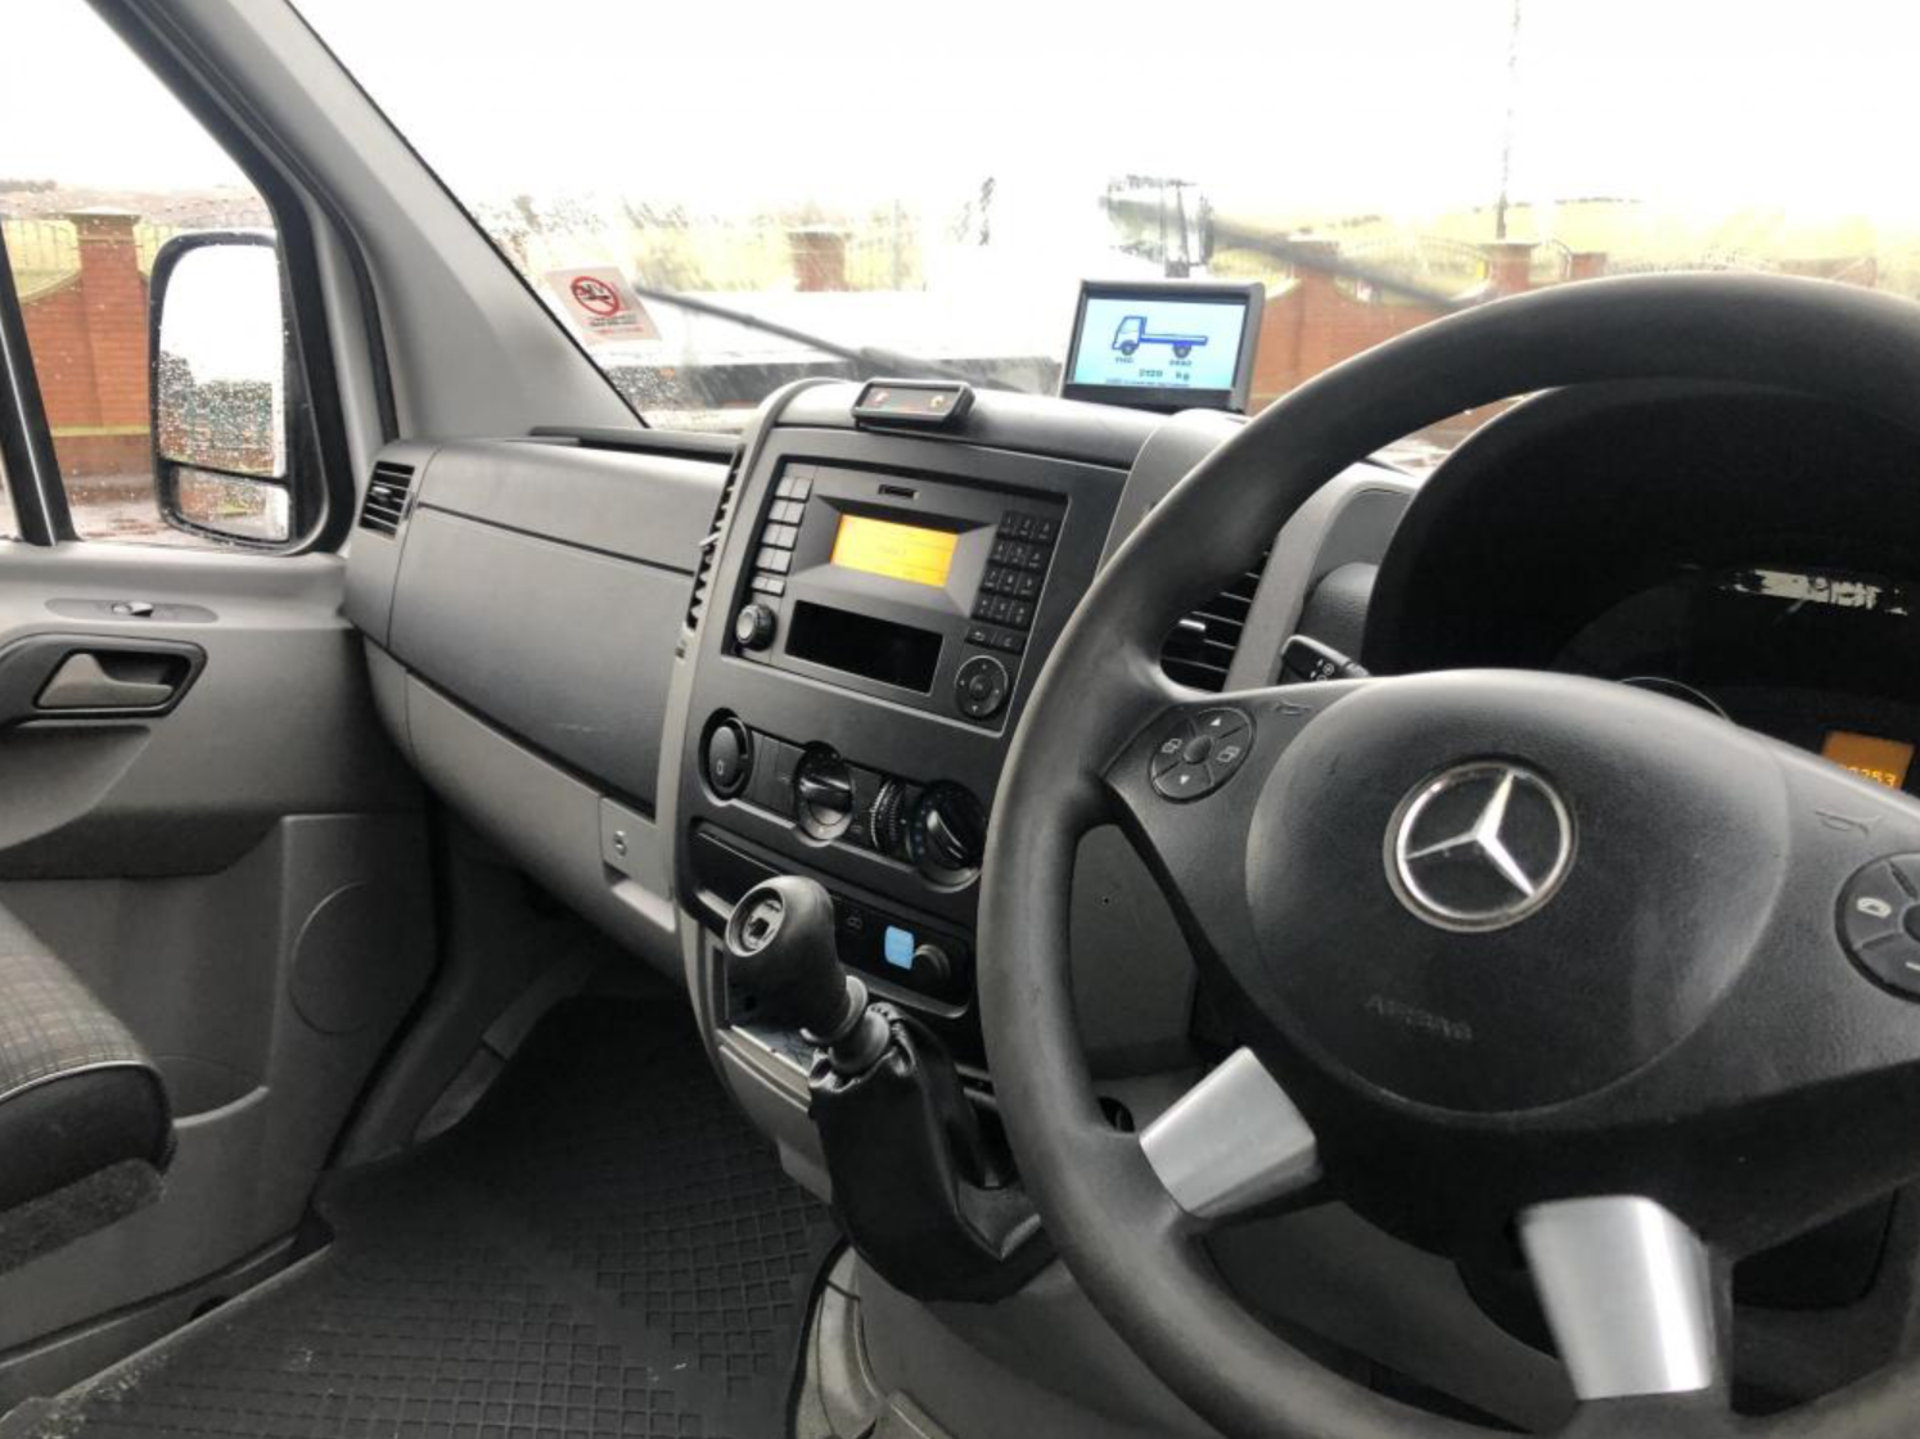 2017 67 plate Mercedes-Benz sprinter 314 Cdi 13 ft alloy drop side truck, manual gearbox *PLUS VAT* - Image 9 of 11